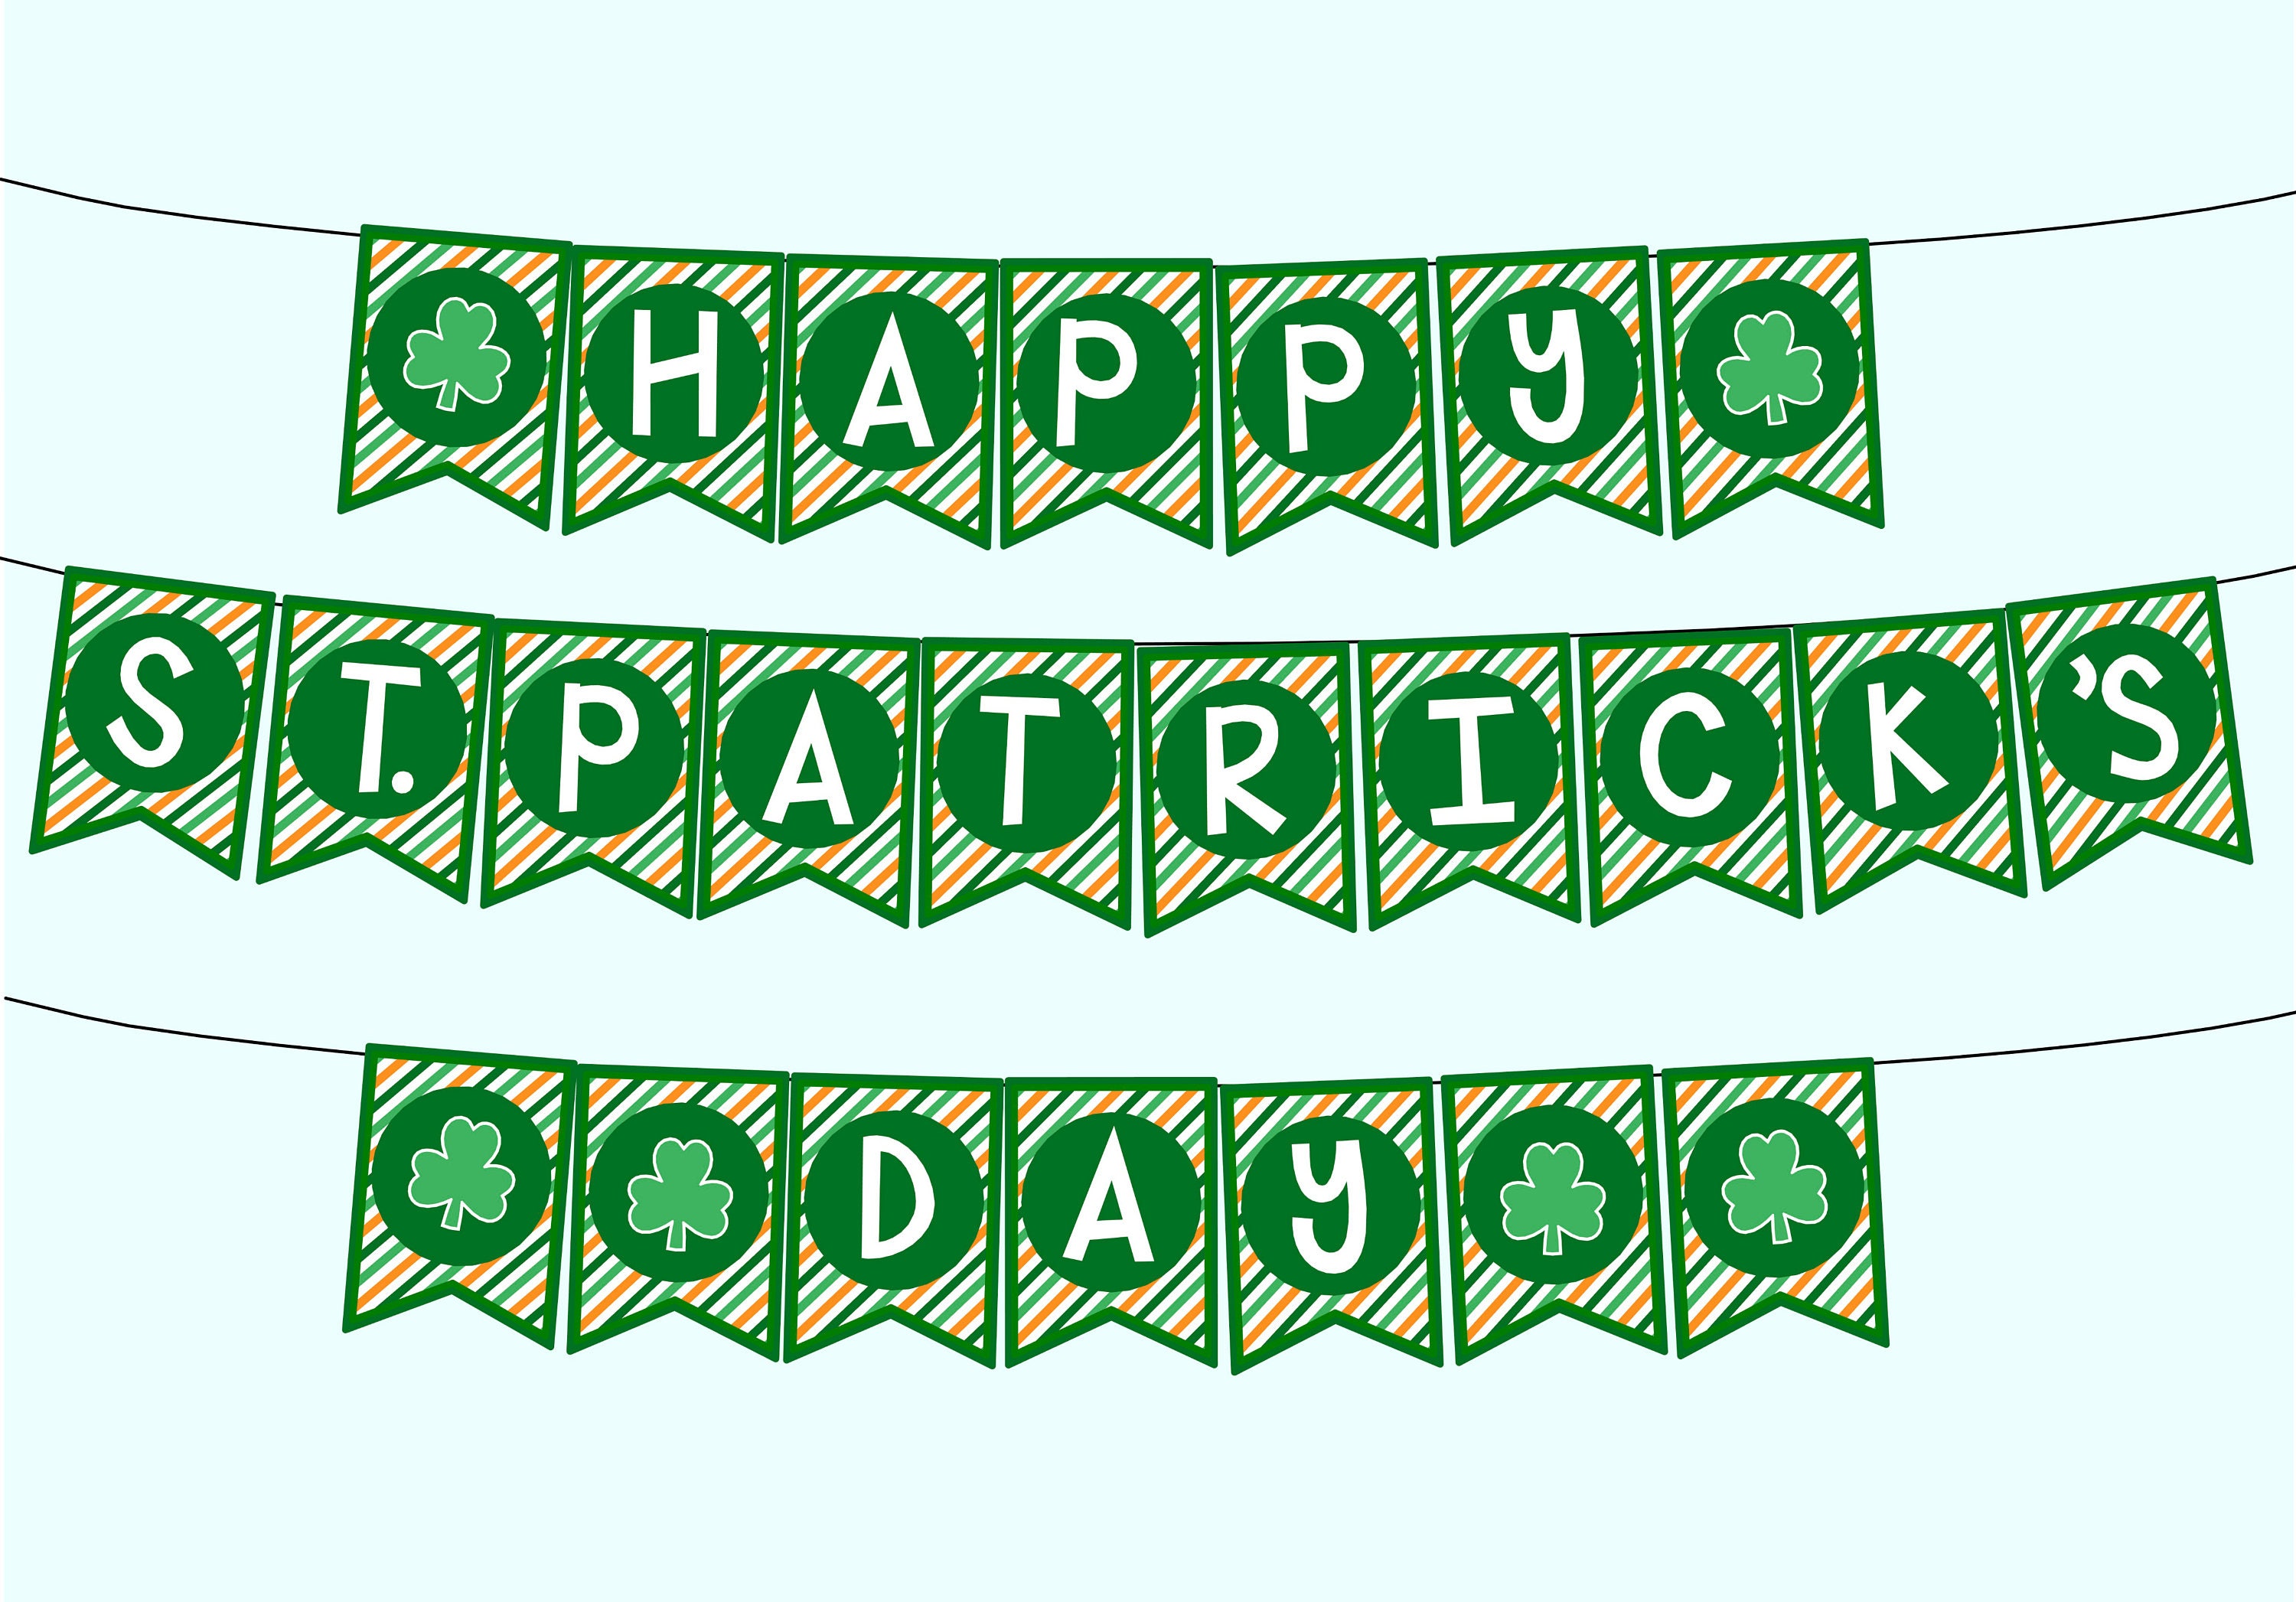 Free Printable St. Patrick's Day Sign